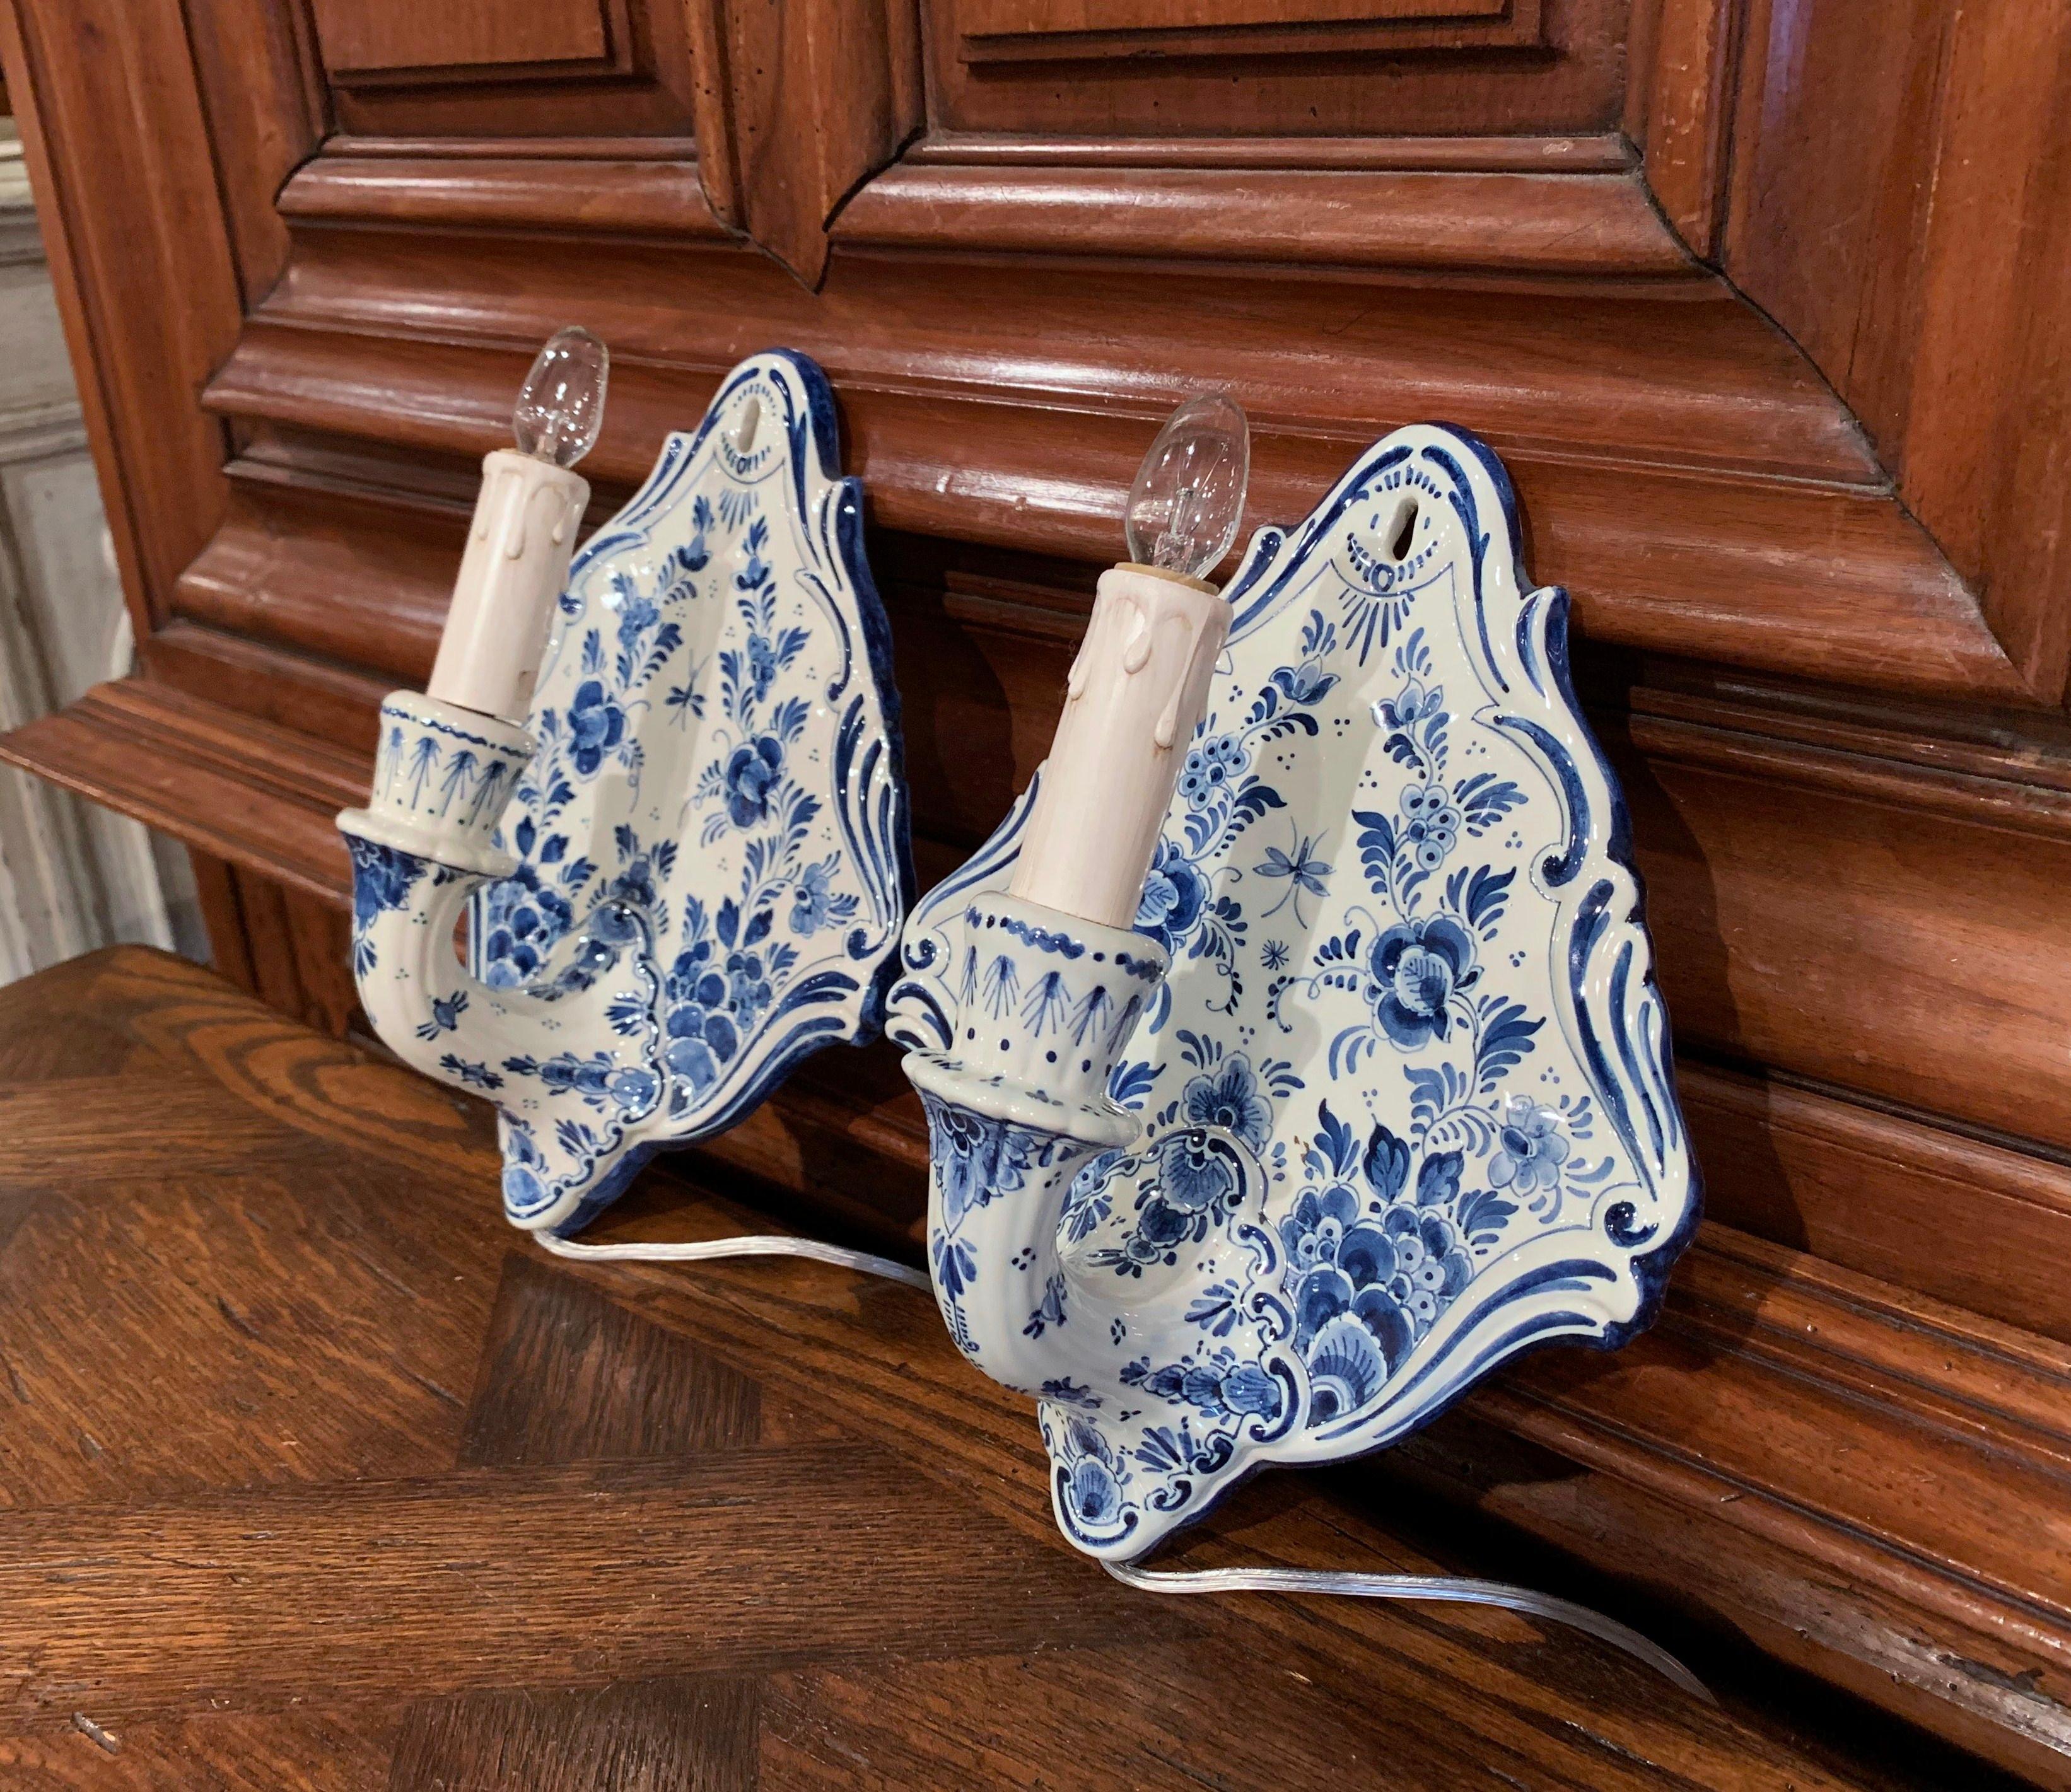 Decorate a powder room with this elegant pair of ceramic sconces, crafted in Holland circa 1950, each single light has new wiring embellished with a decorative candle sleeve; the fixture is hand painted with blue and white floral and leaf decor in